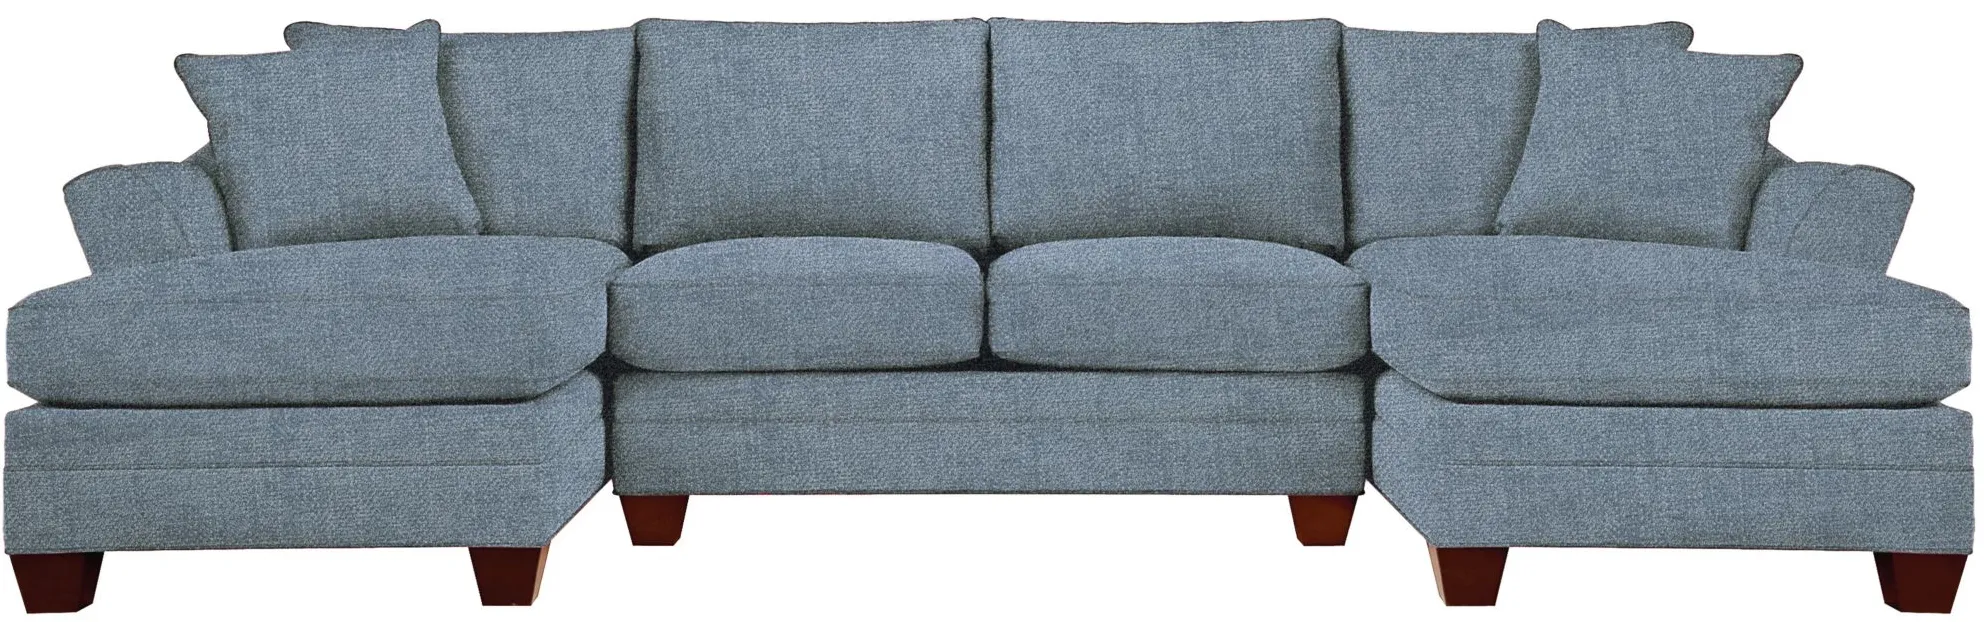 Foresthill 3-pc. Symmetrical Chaise Sectional Sofa in Elliot French Blue by H.M. Richards